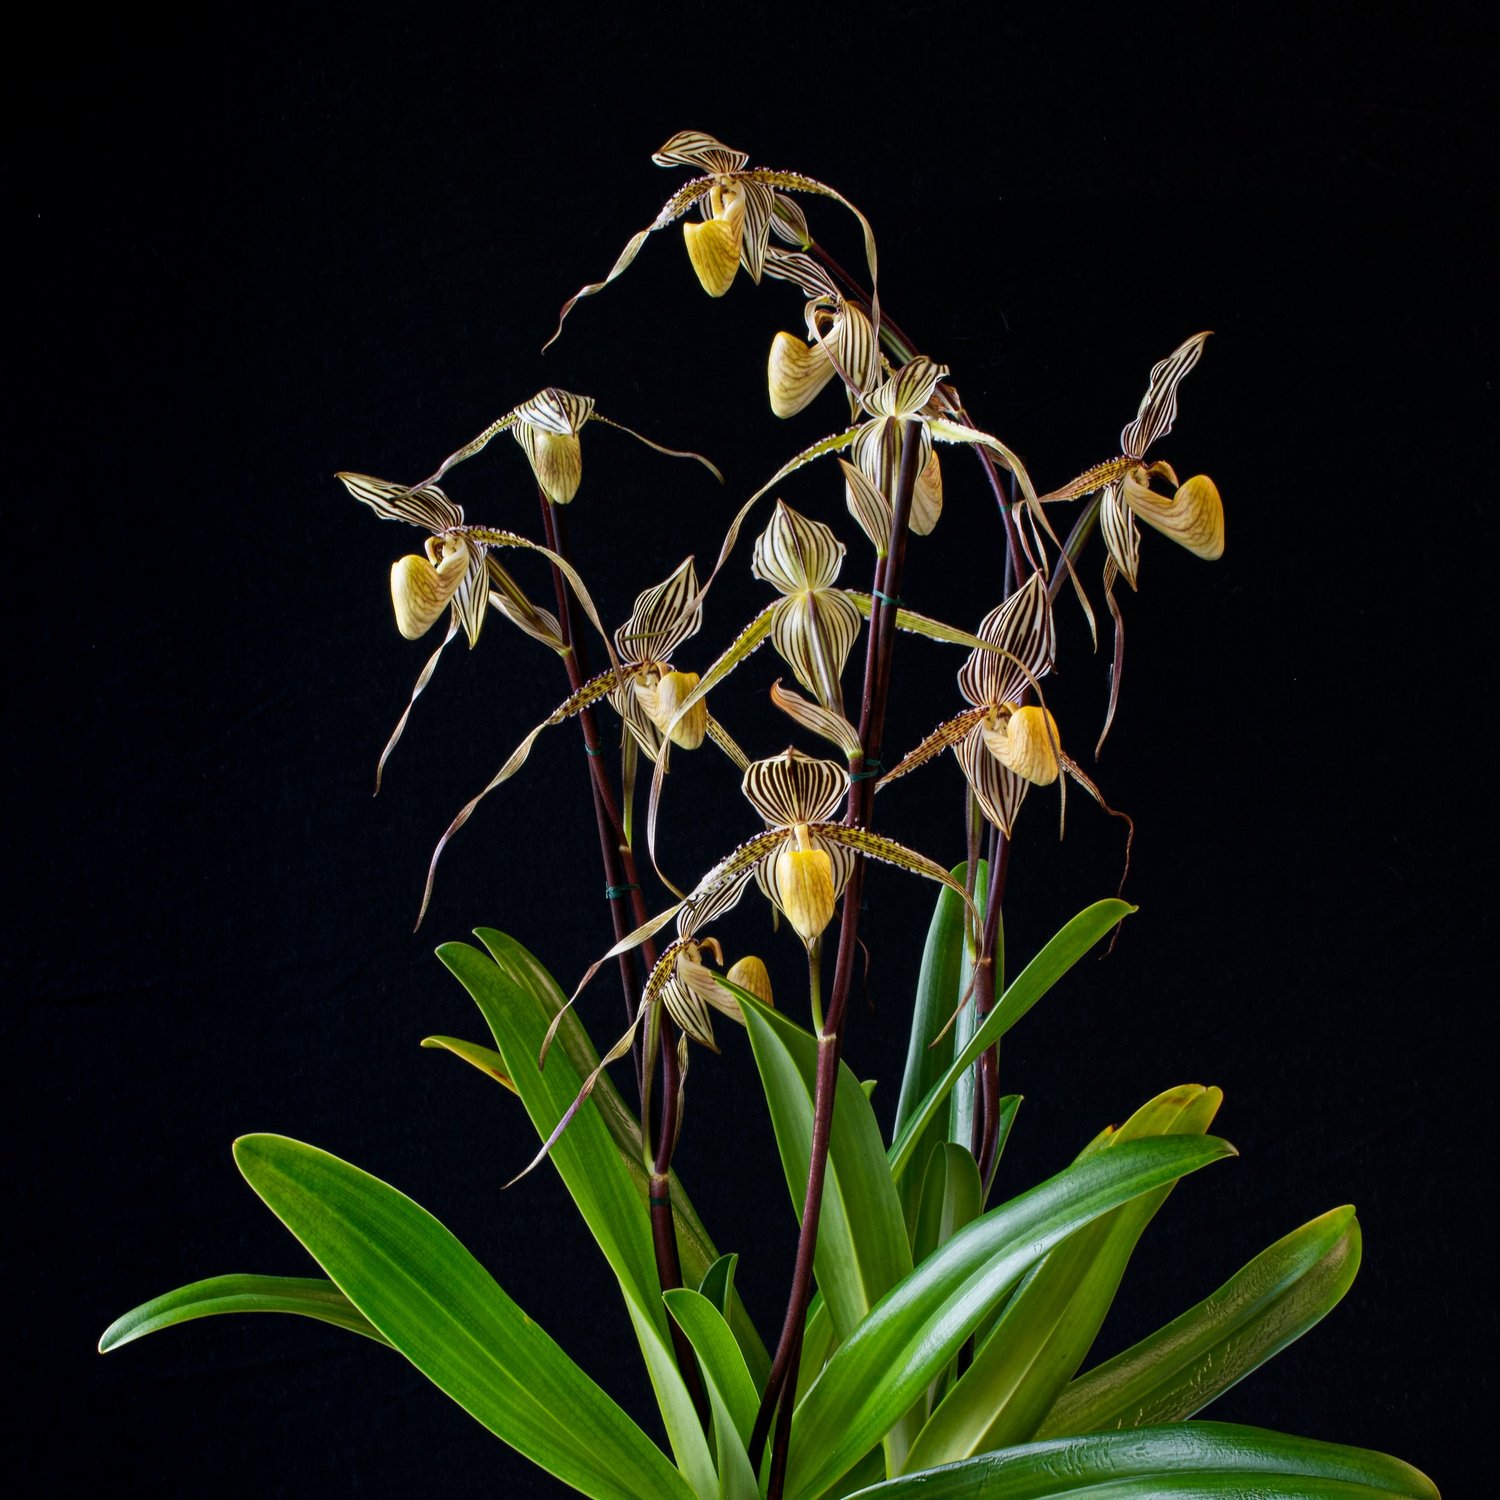 Episode 240: slipper orchids and Perrone societies — Jane orchid